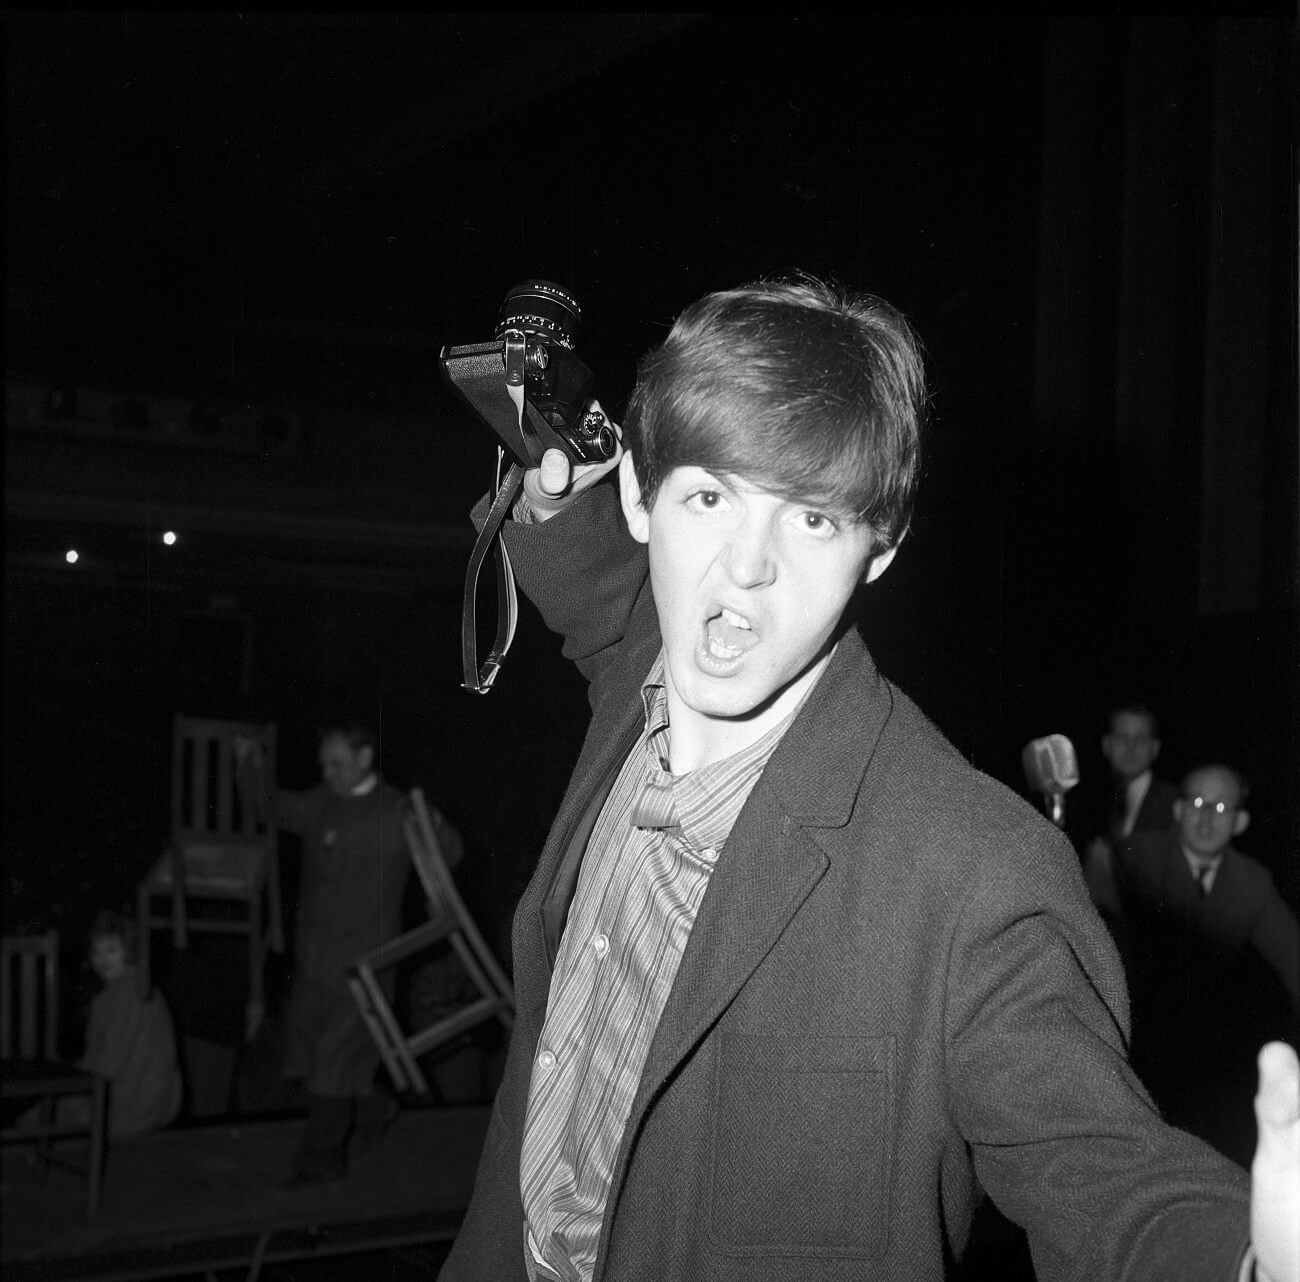 A black and white photo of Paul McCartney holding up a camera and making a face.